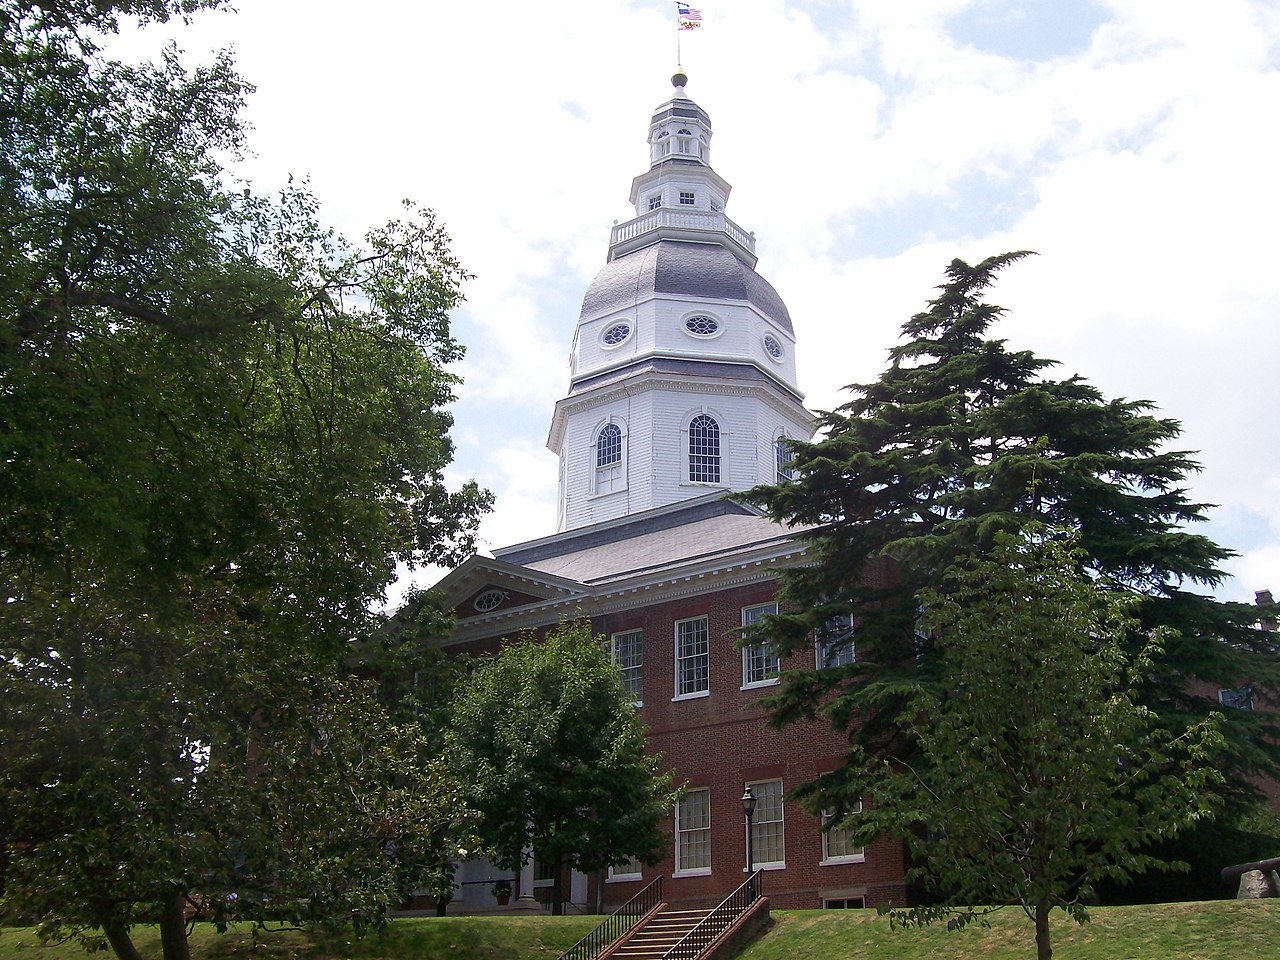 Maryland has banned sentences of life without parole for children.